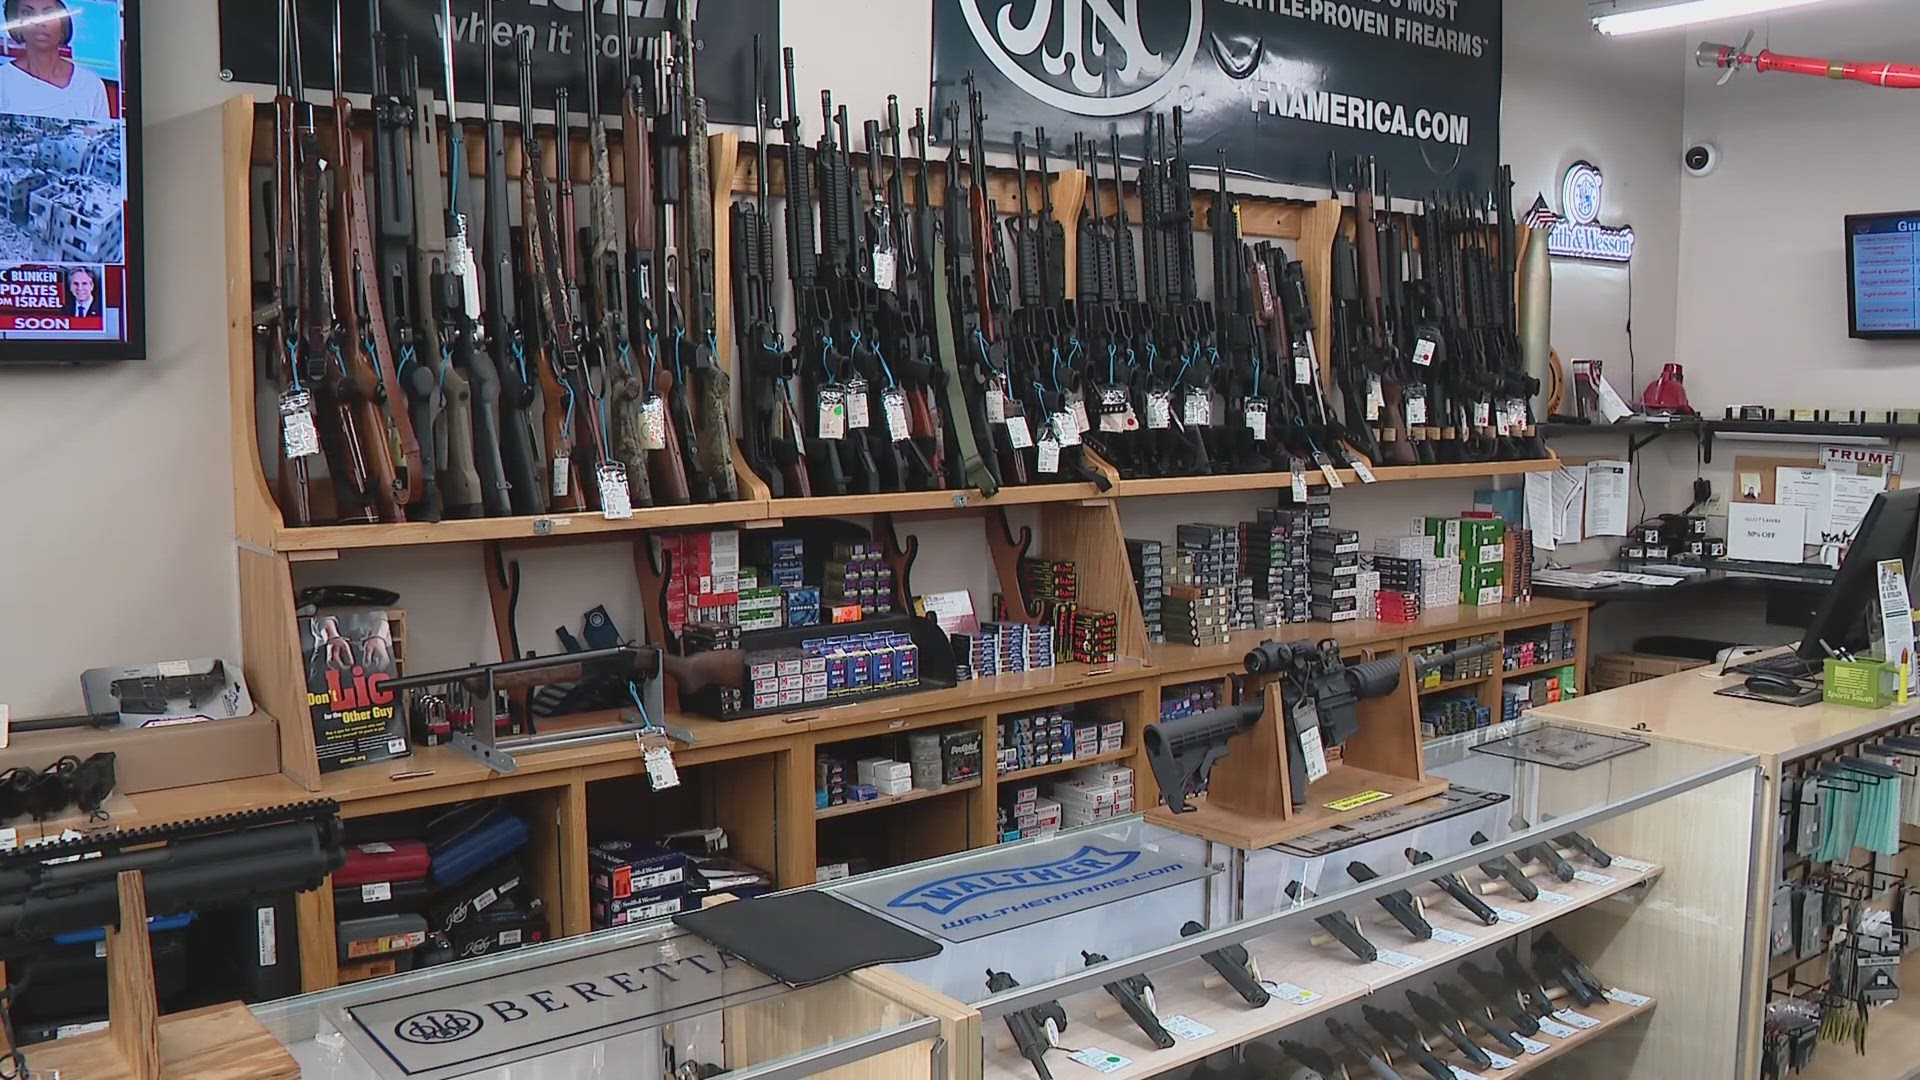 Gun store owner Eric Delbert said this trend is common when there are major incidents locally and across the world.